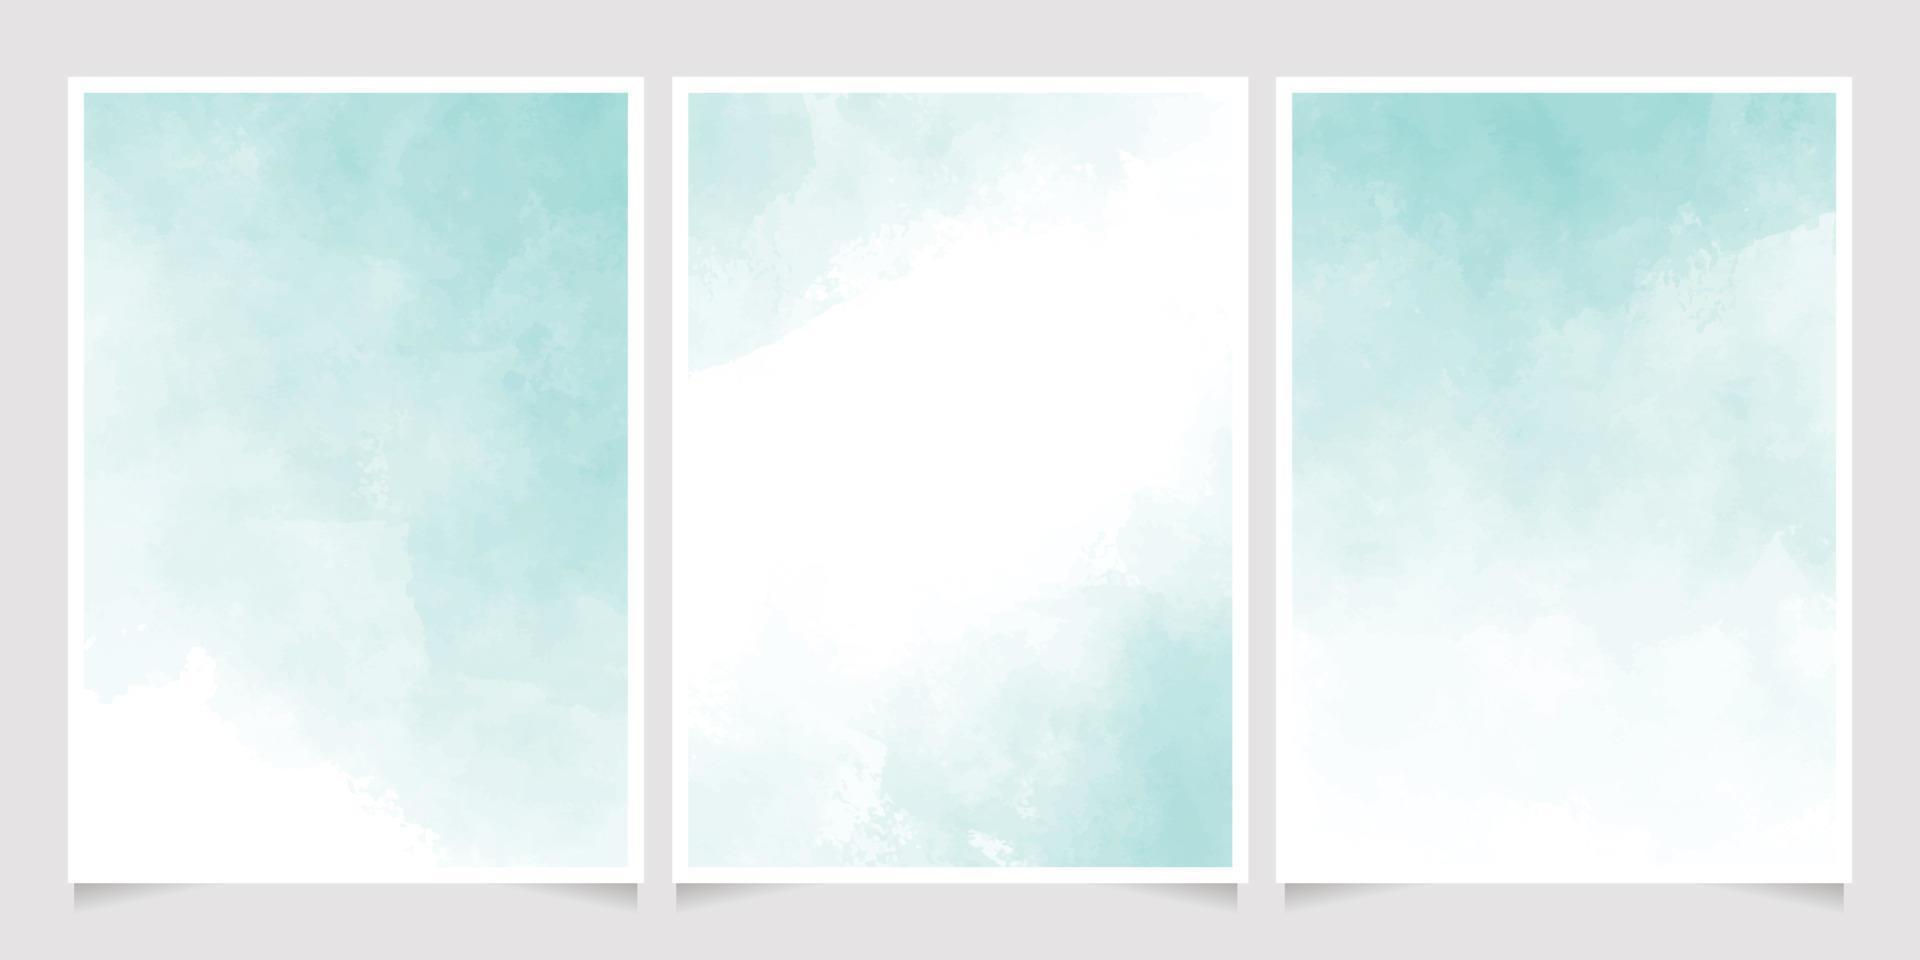 green pastel watercolor wet wash splash 5x7 invitation card background template collection vector